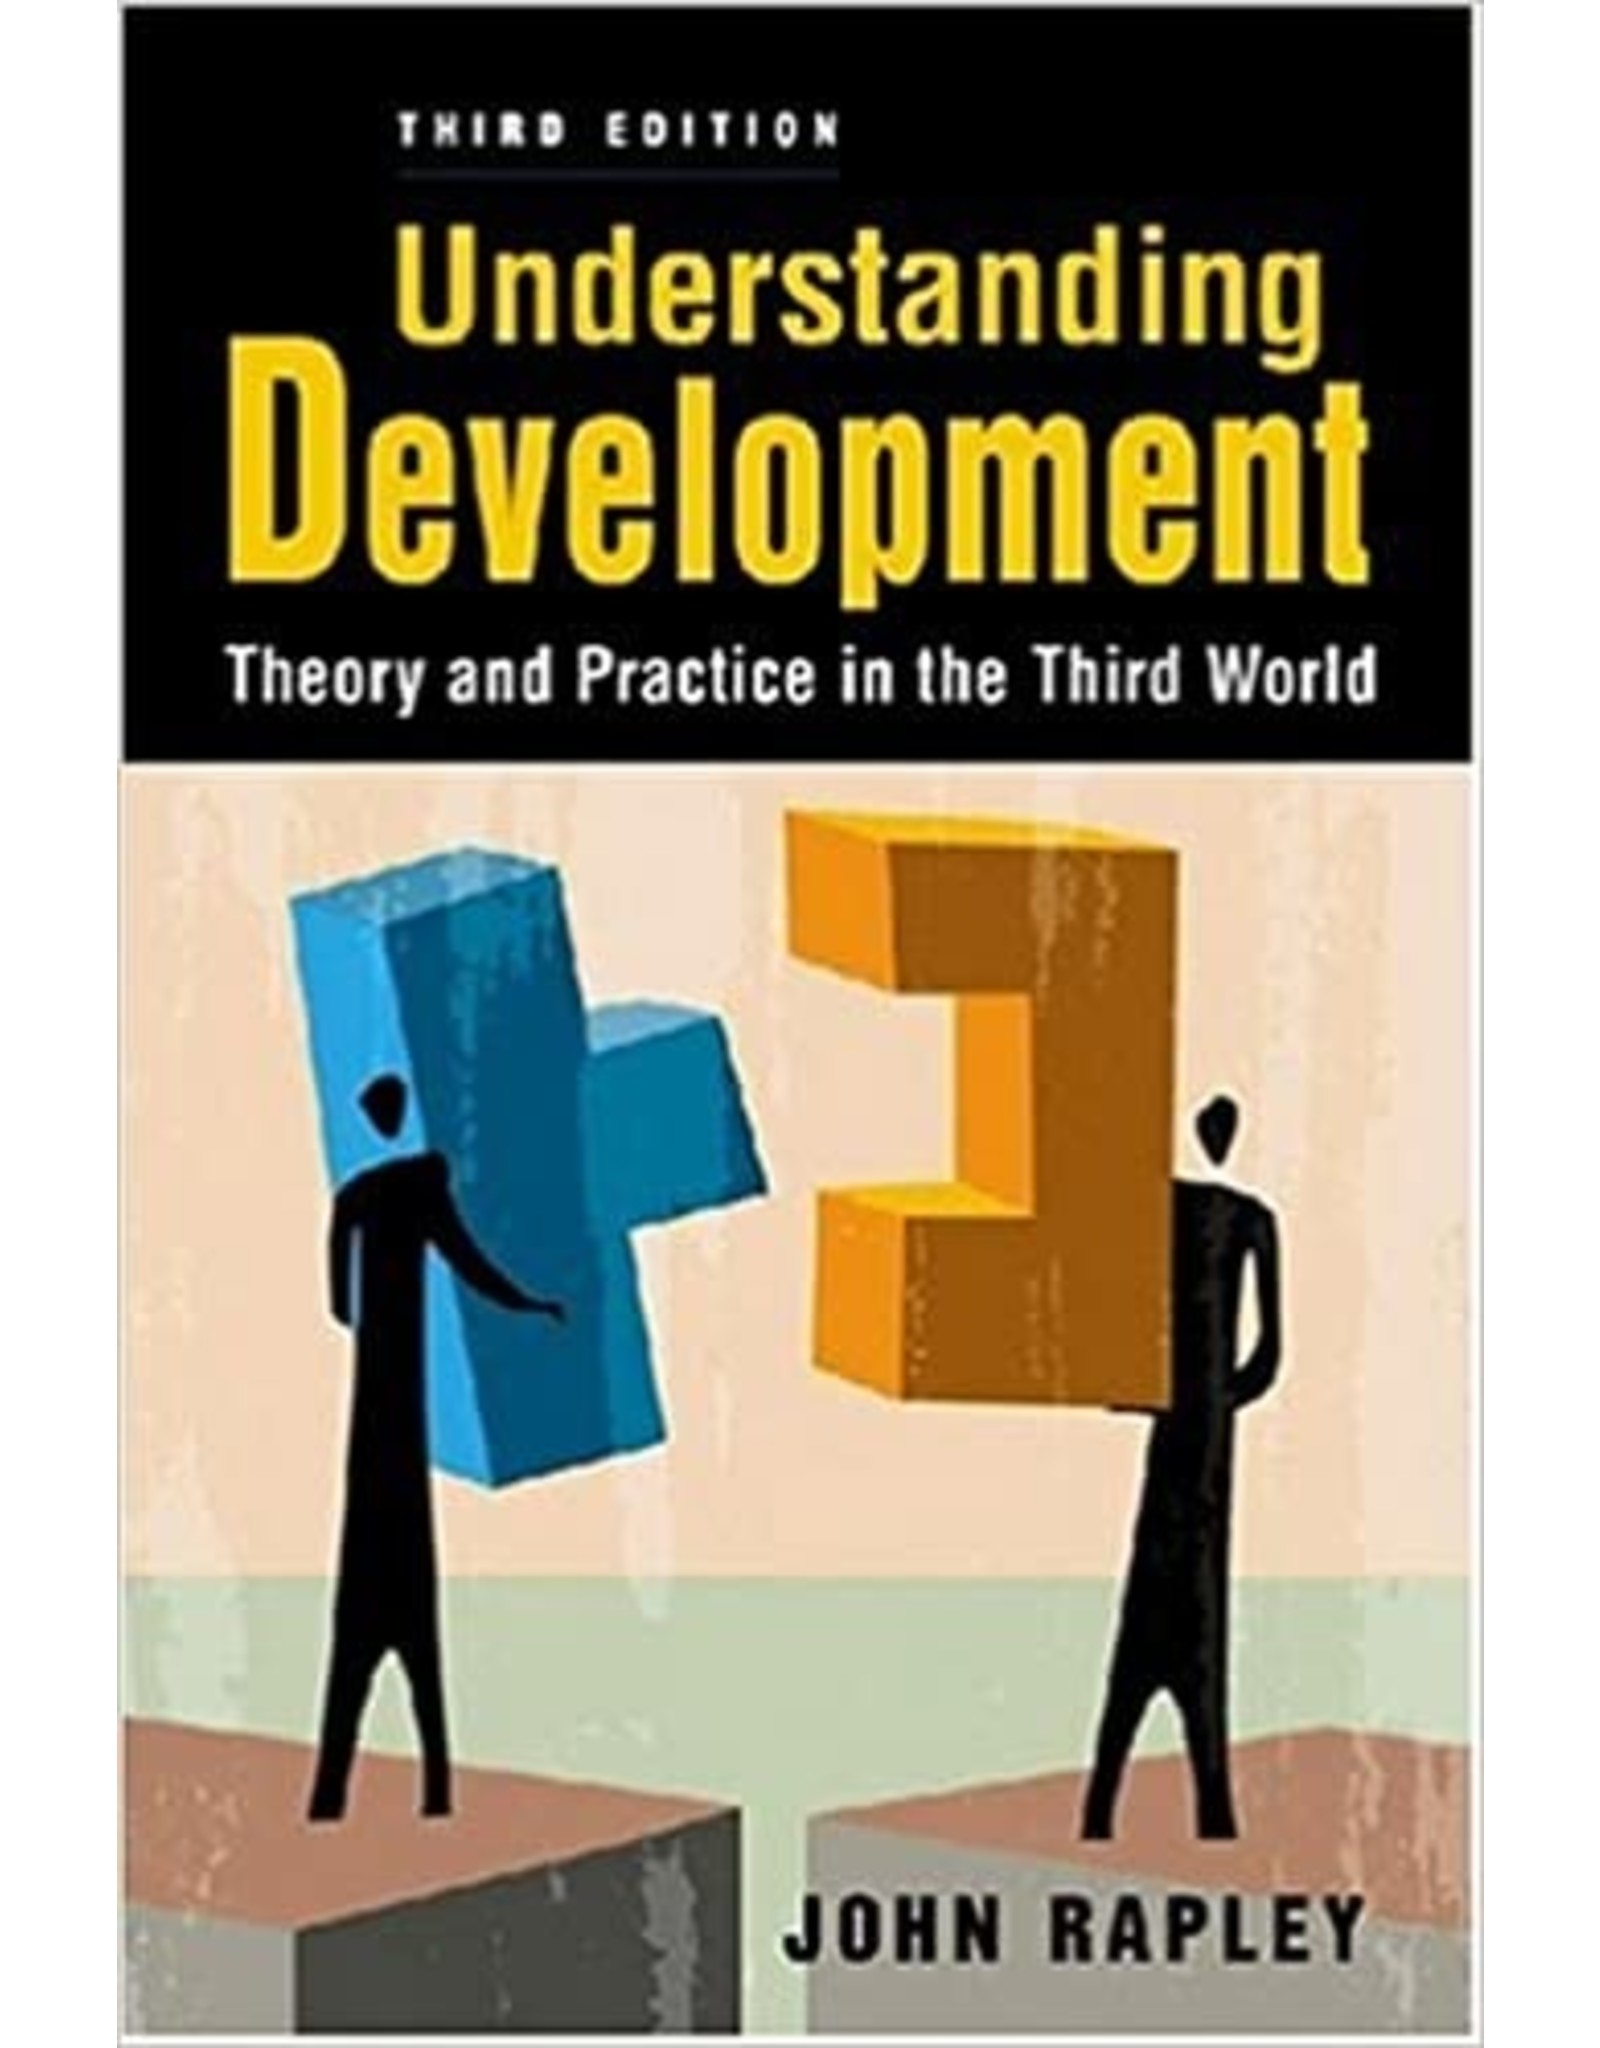 Textbook Understanding Development: Theory and Practice in the Third World